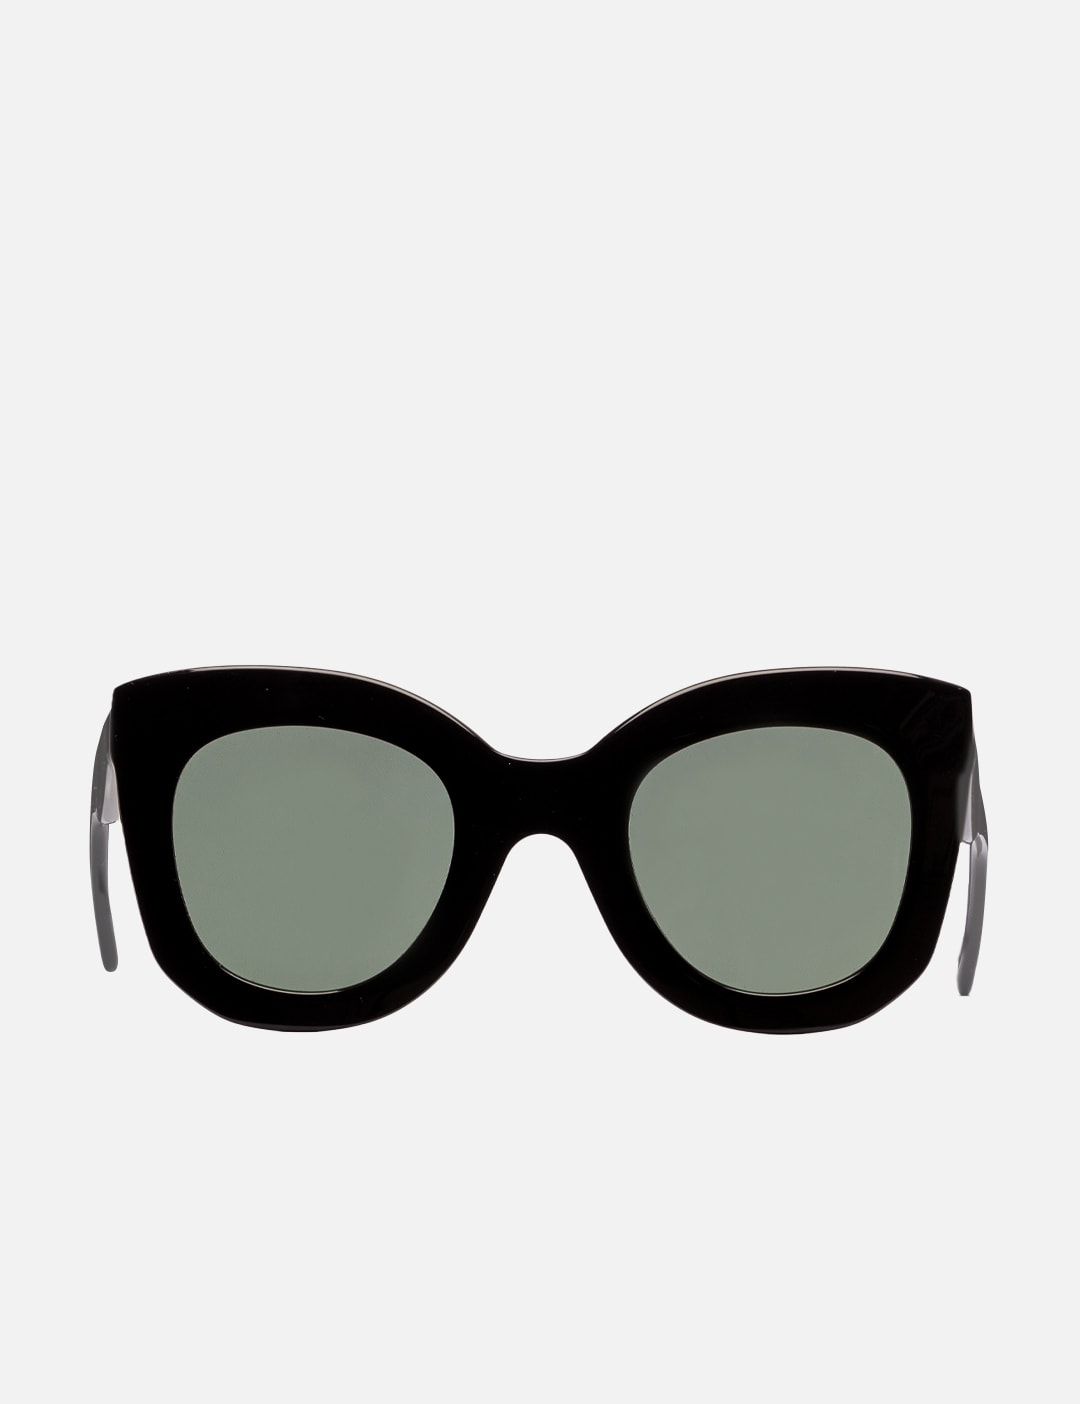 CELINE - CELINE CAT-EYE SUNGLASSES | HBX - Globally Curated Fashion and ...